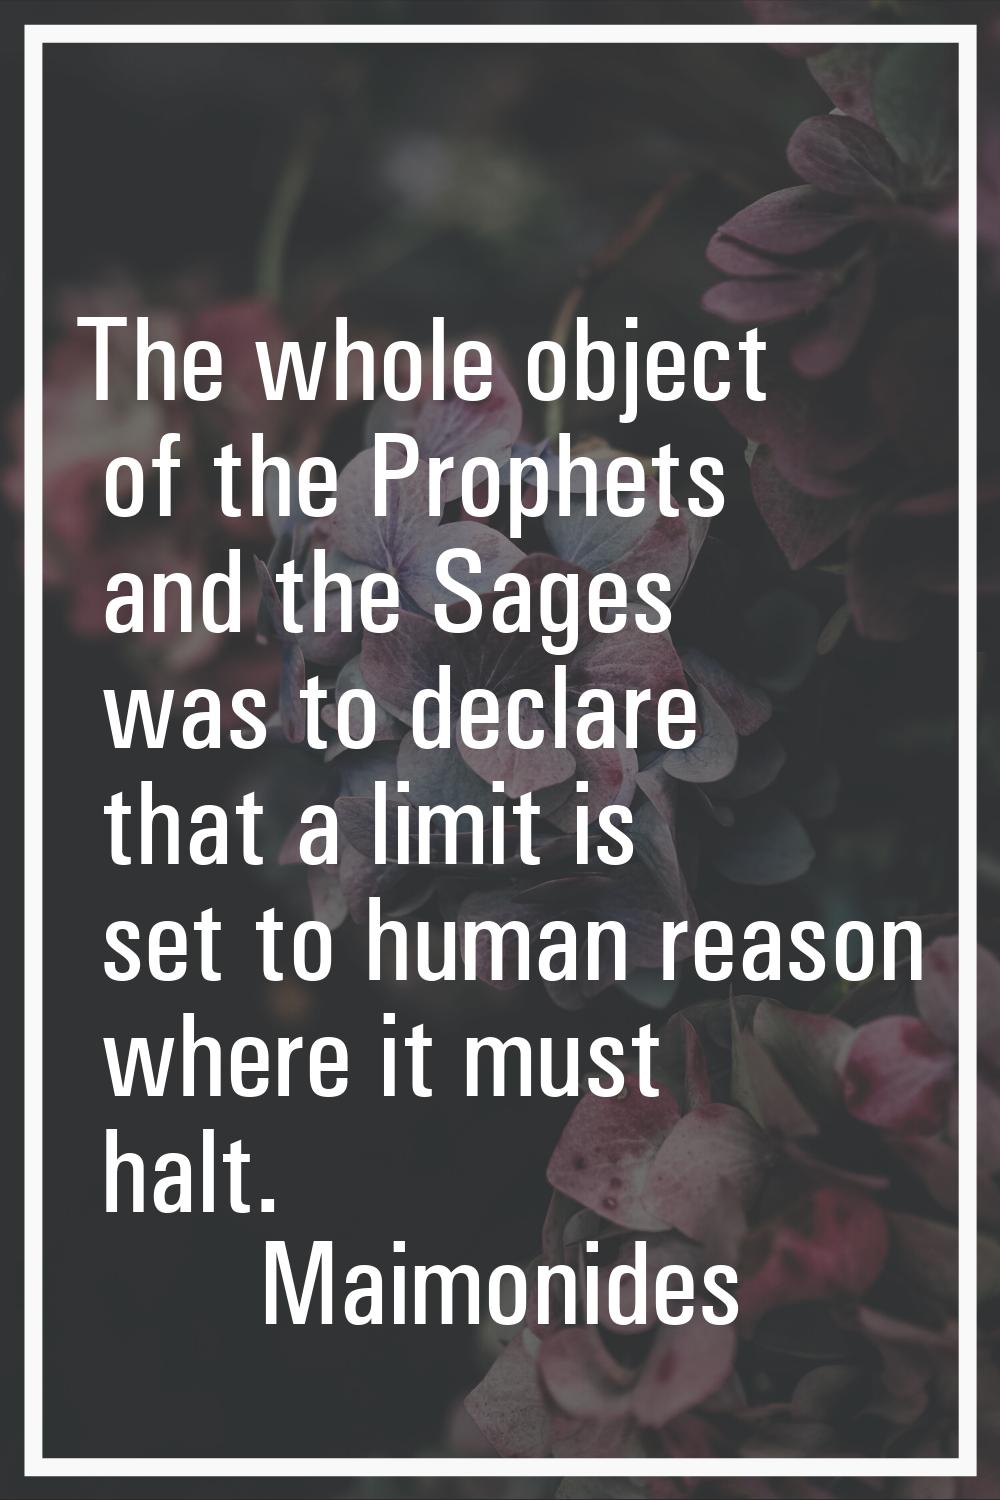 The whole object of the Prophets and the Sages was to declare that a limit is set to human reason w